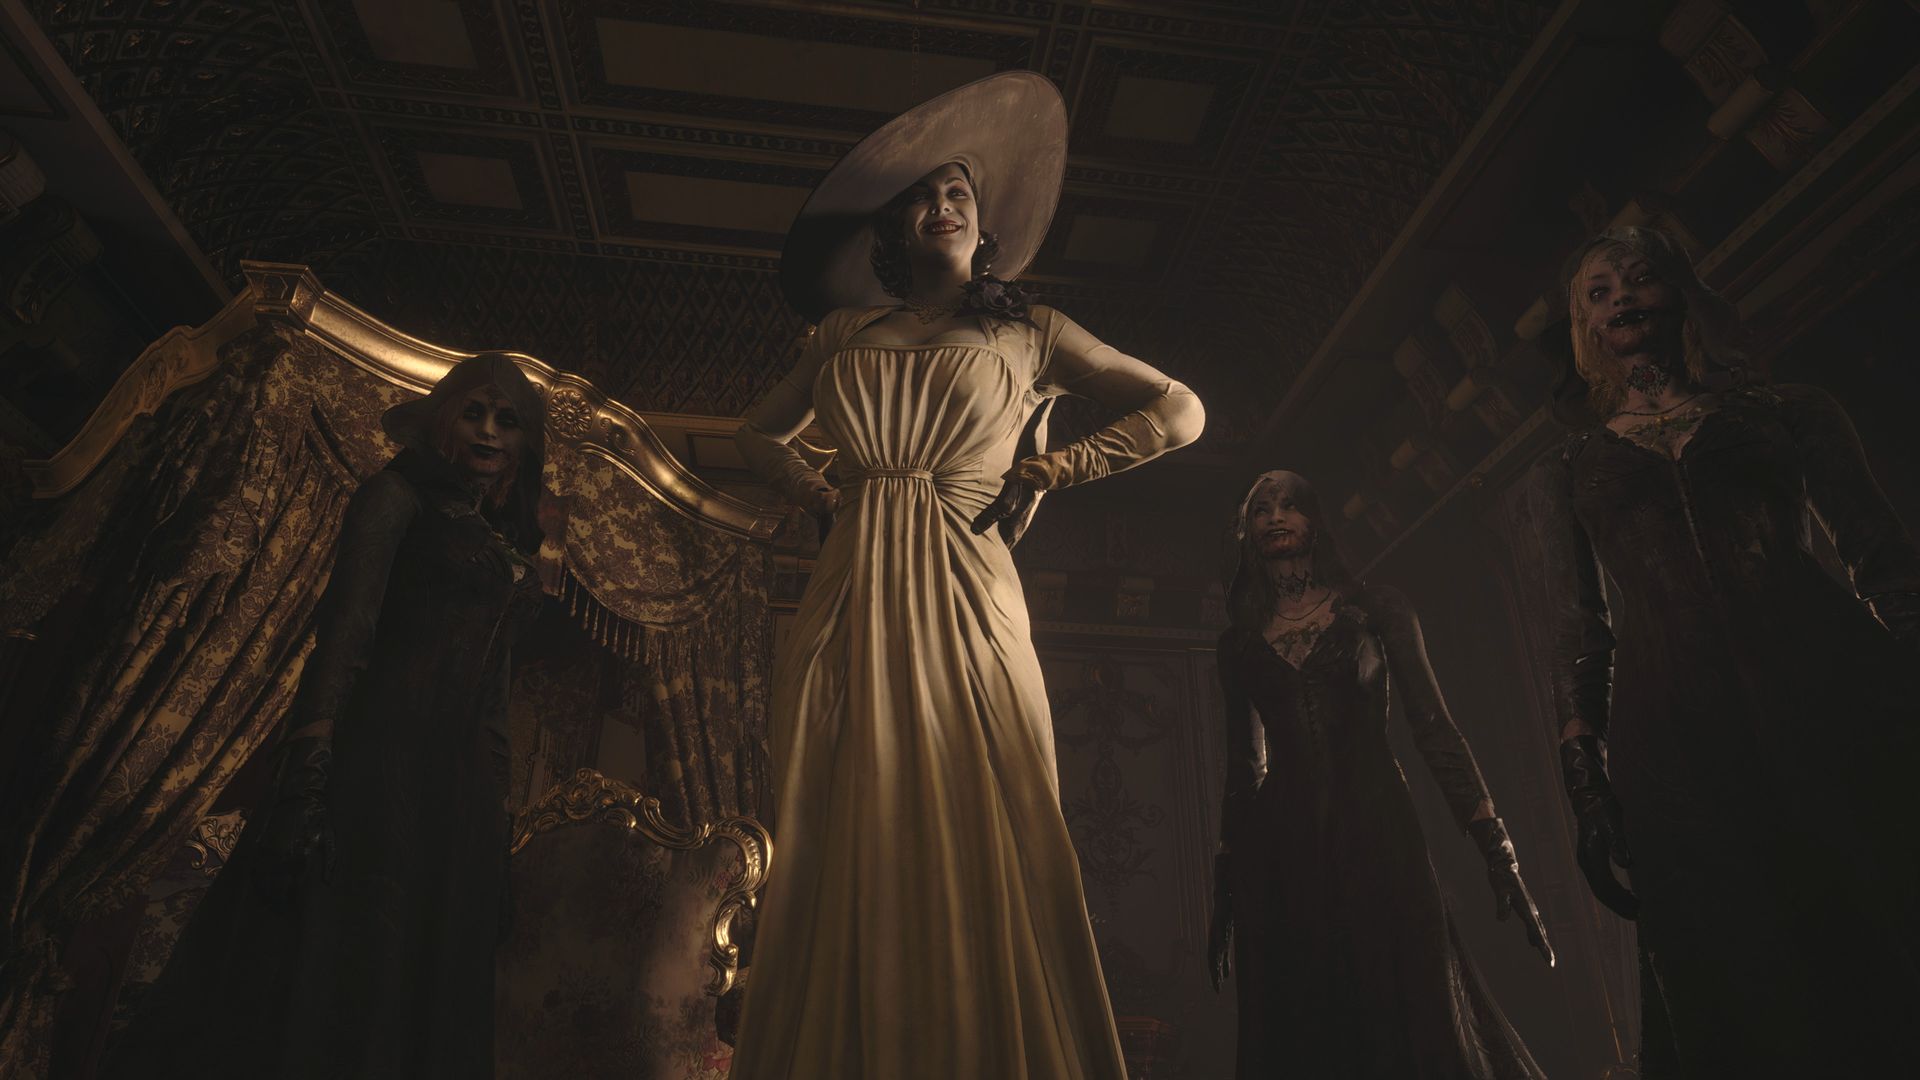 Video game screenshot of a tall woman in a long dress and wide-brimmed hat, looking down at the player. The dim lighting evokes a horror setting.